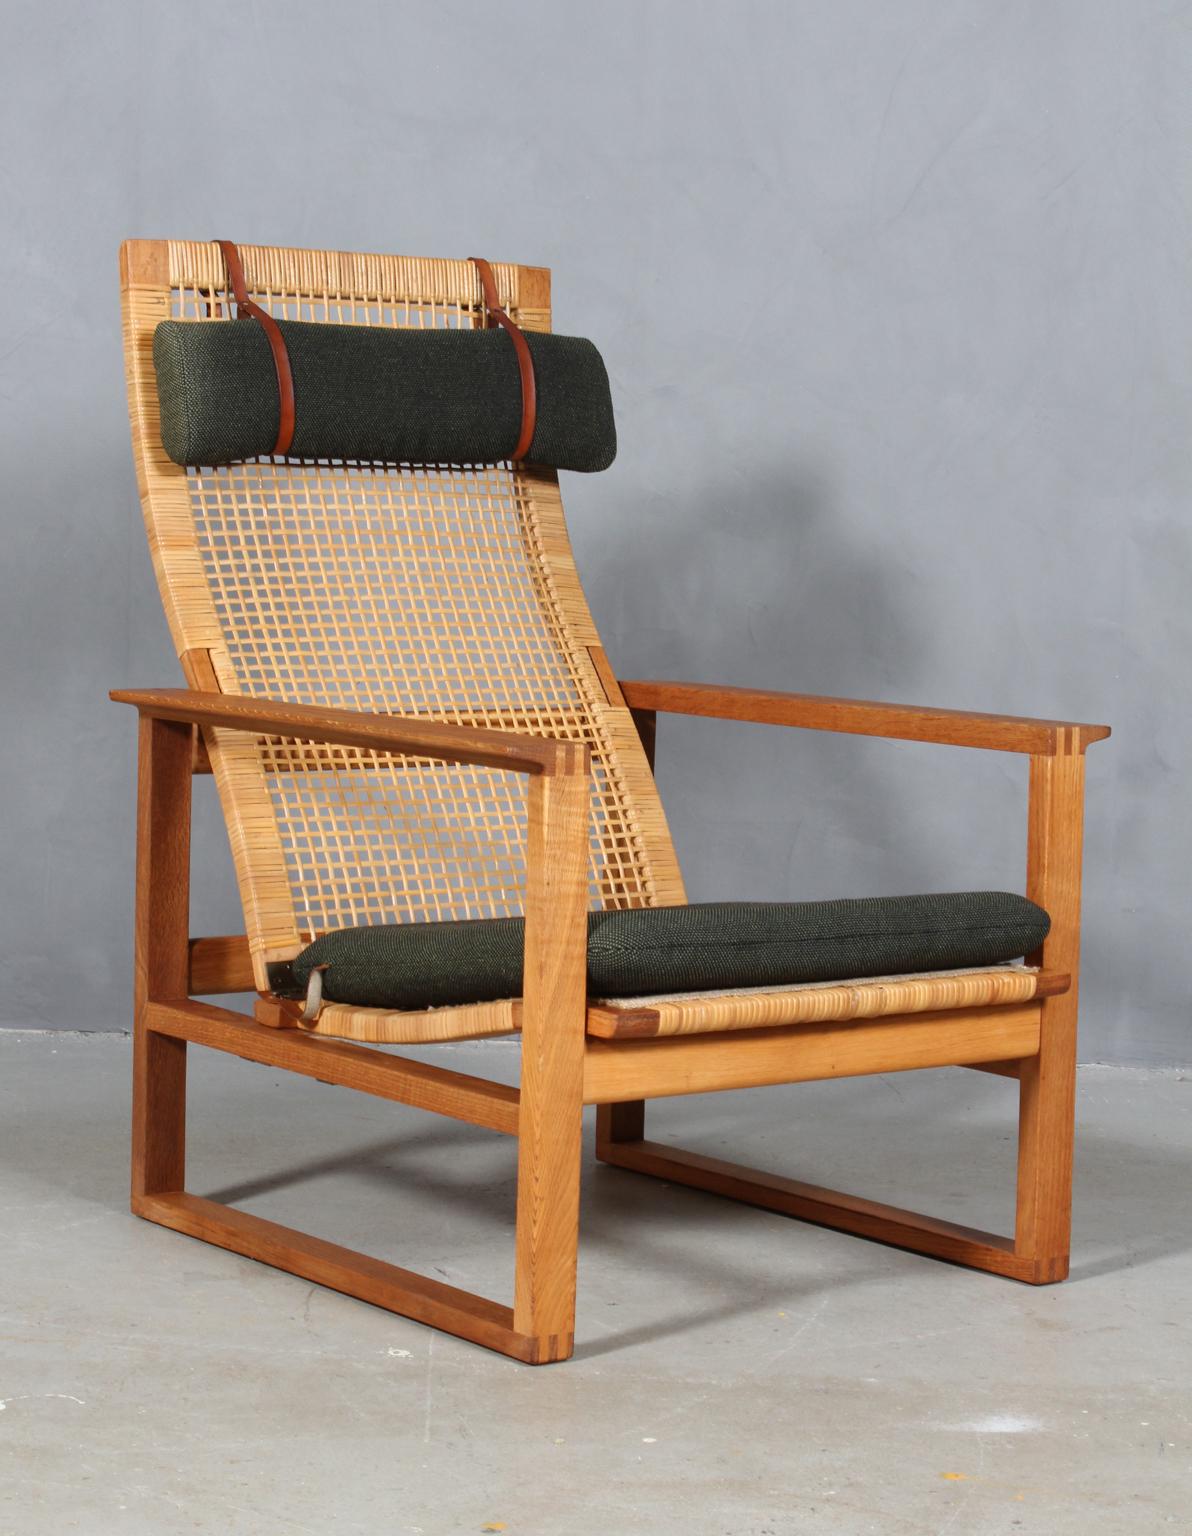 A Børge Mogensen lounge chair and ottoamn designed in 1956 model number 2256 for Fredericia Stolefabrik. Cubical frames made of solid oak with finger joints and cane. This high back model 2254 also reclines.

Original reupholstered in Kvadrat